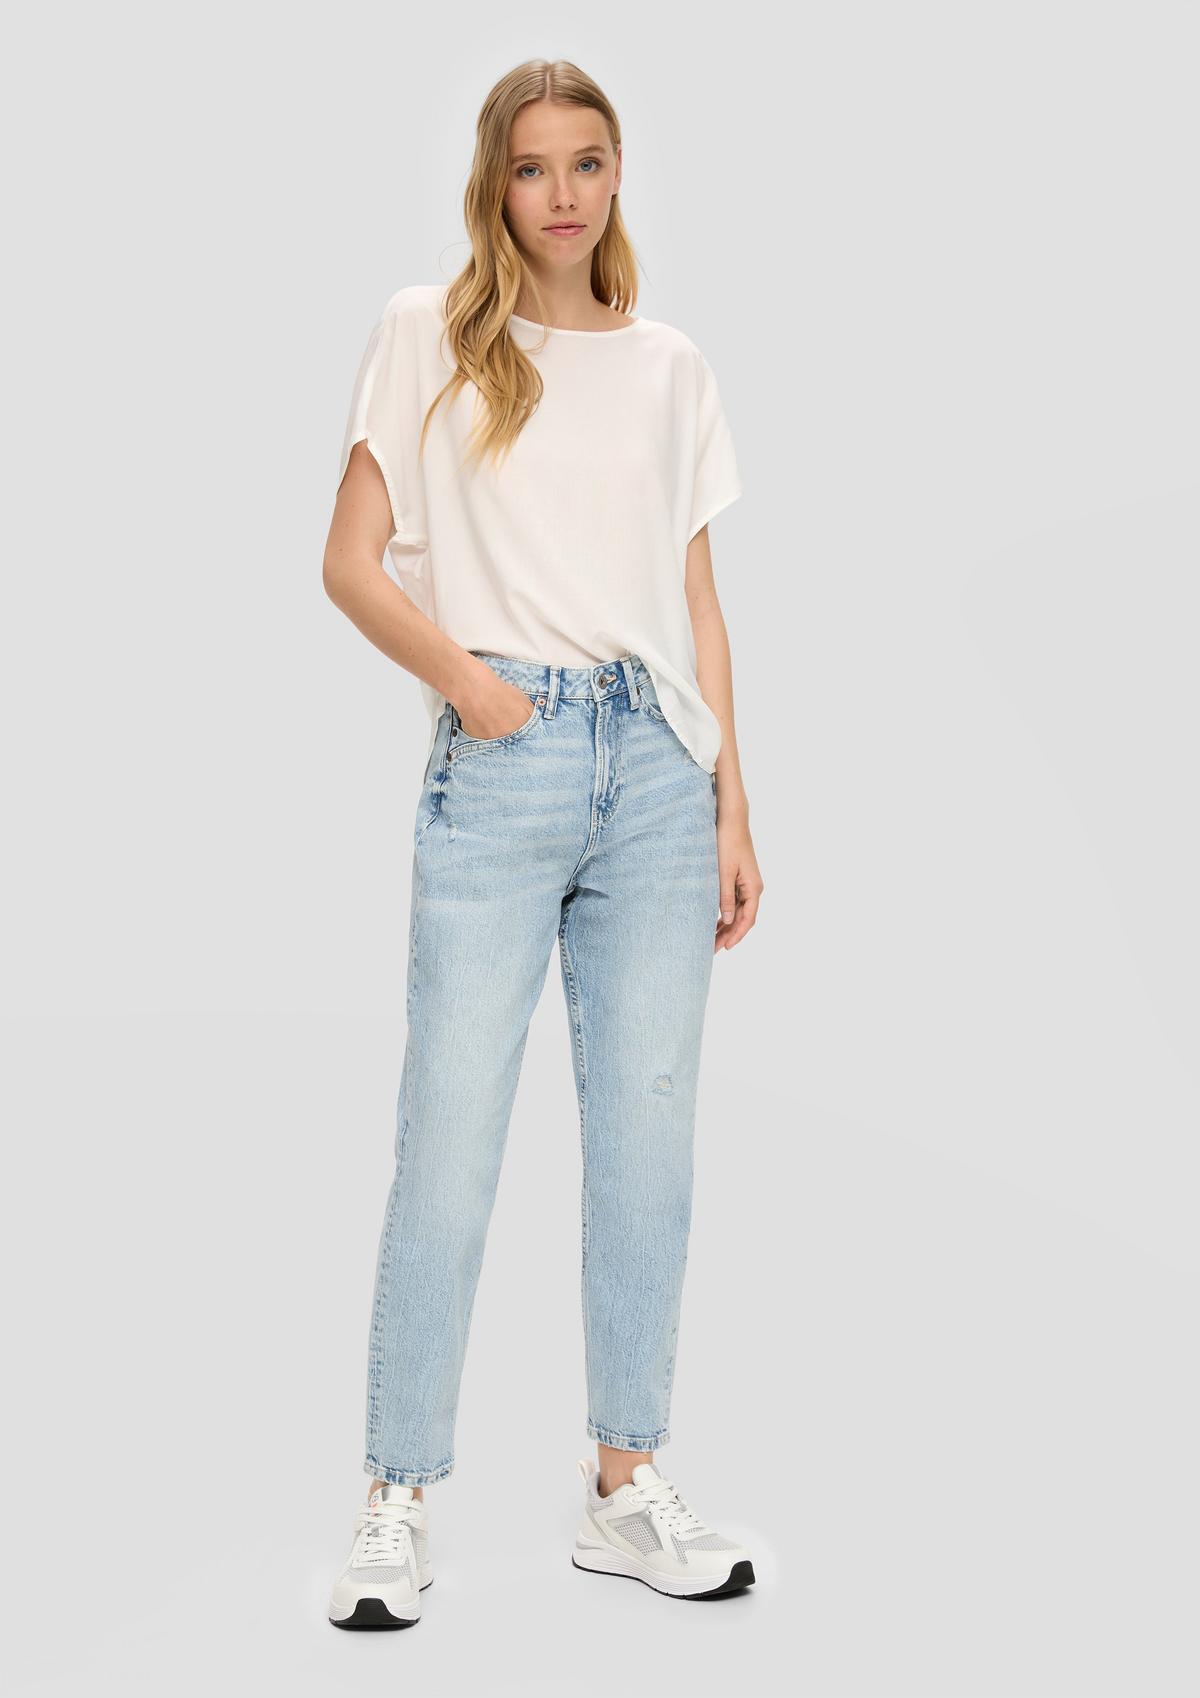 s.Oliver Enkellange mom jeans / relaxed fit / high rise / tapered leg